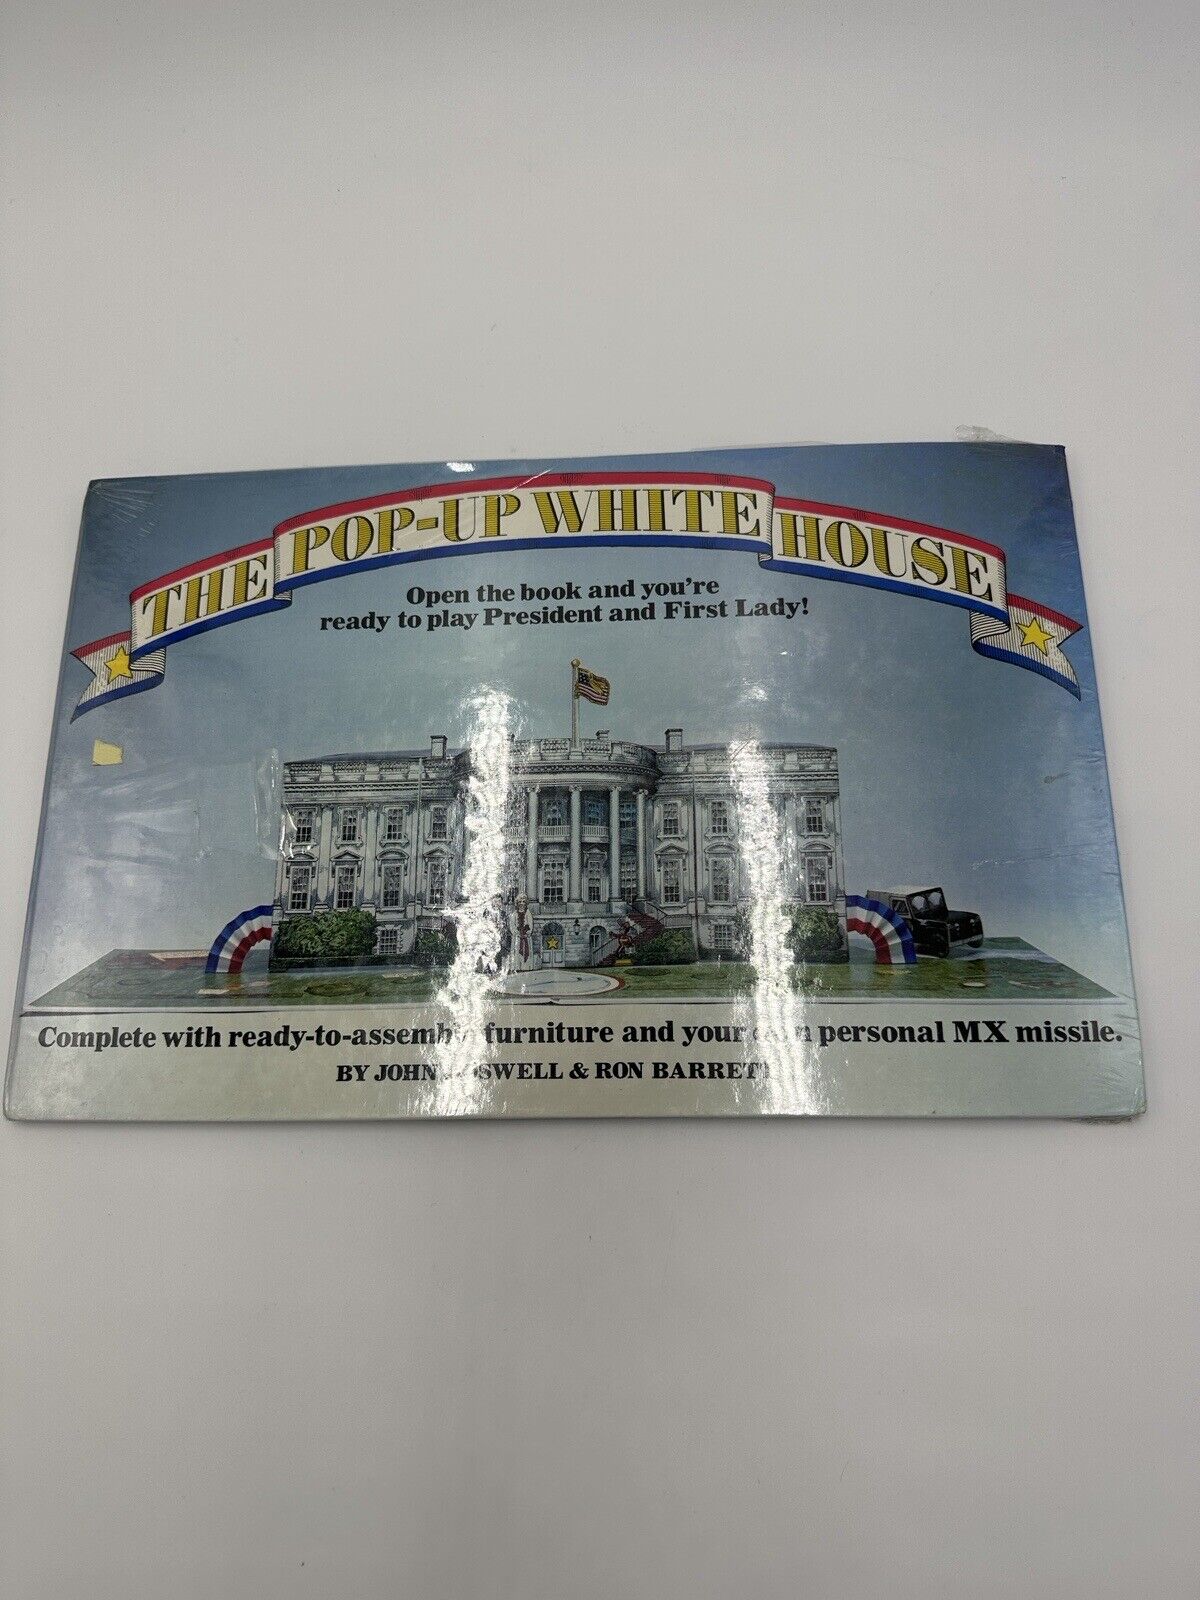 The Pop-Up White House Open the Book and You're Ready to Play President